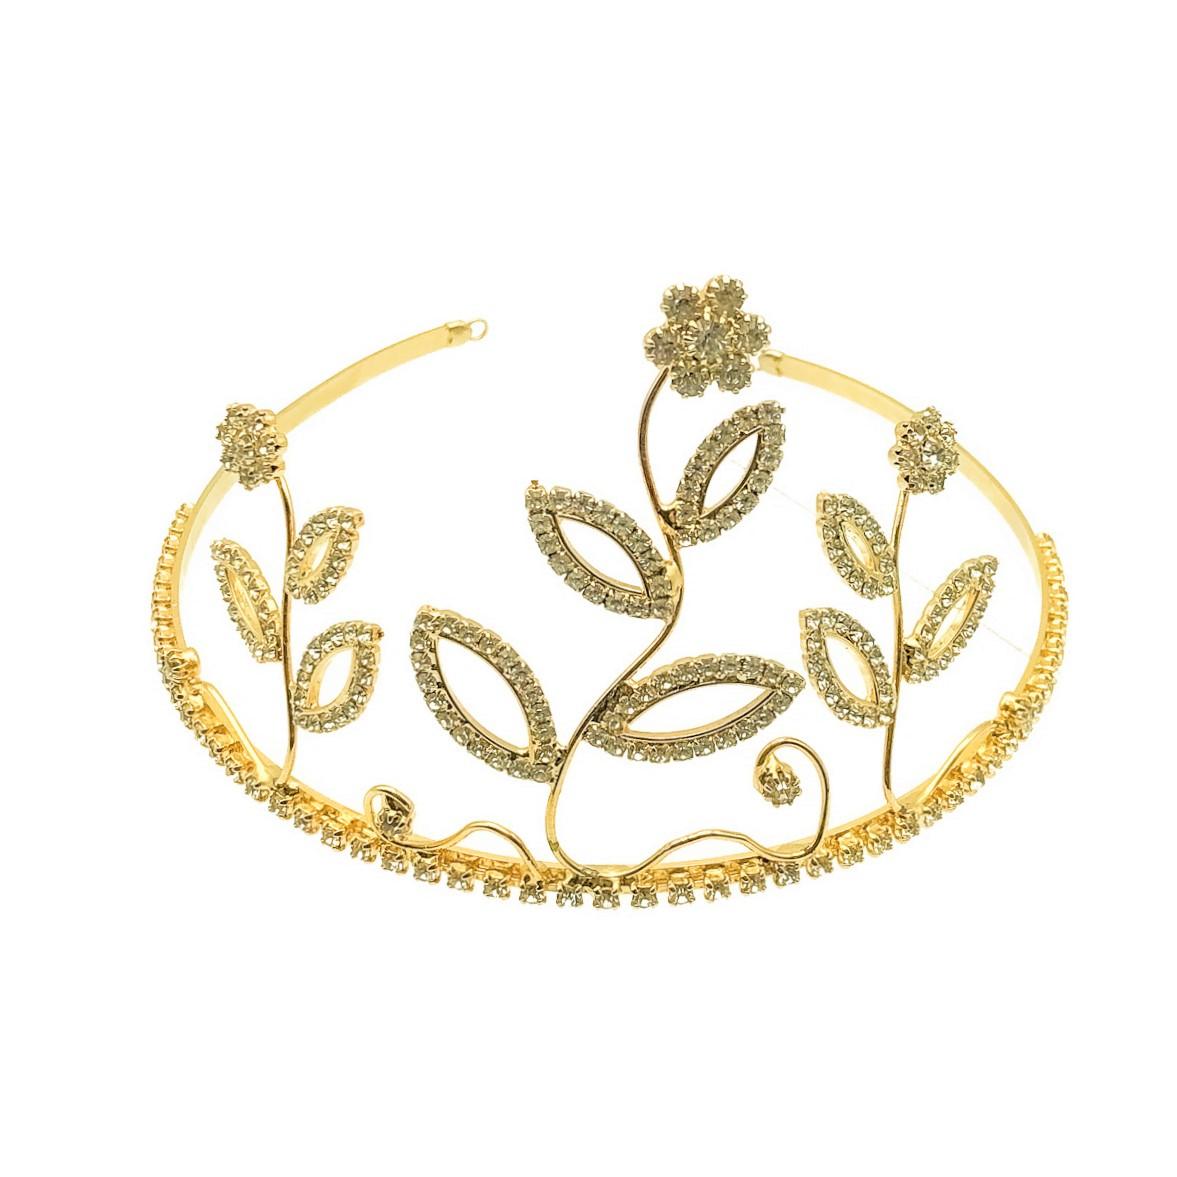 A stunning Vintage Gold & Crystal Flower High Tiara from the 1990s. Crafted in gold tone metal and claw set with a myriad of chaton cut rhinestones. A grand tiara depicting a trio of tall flowers at the front with a stone set band for continuity.